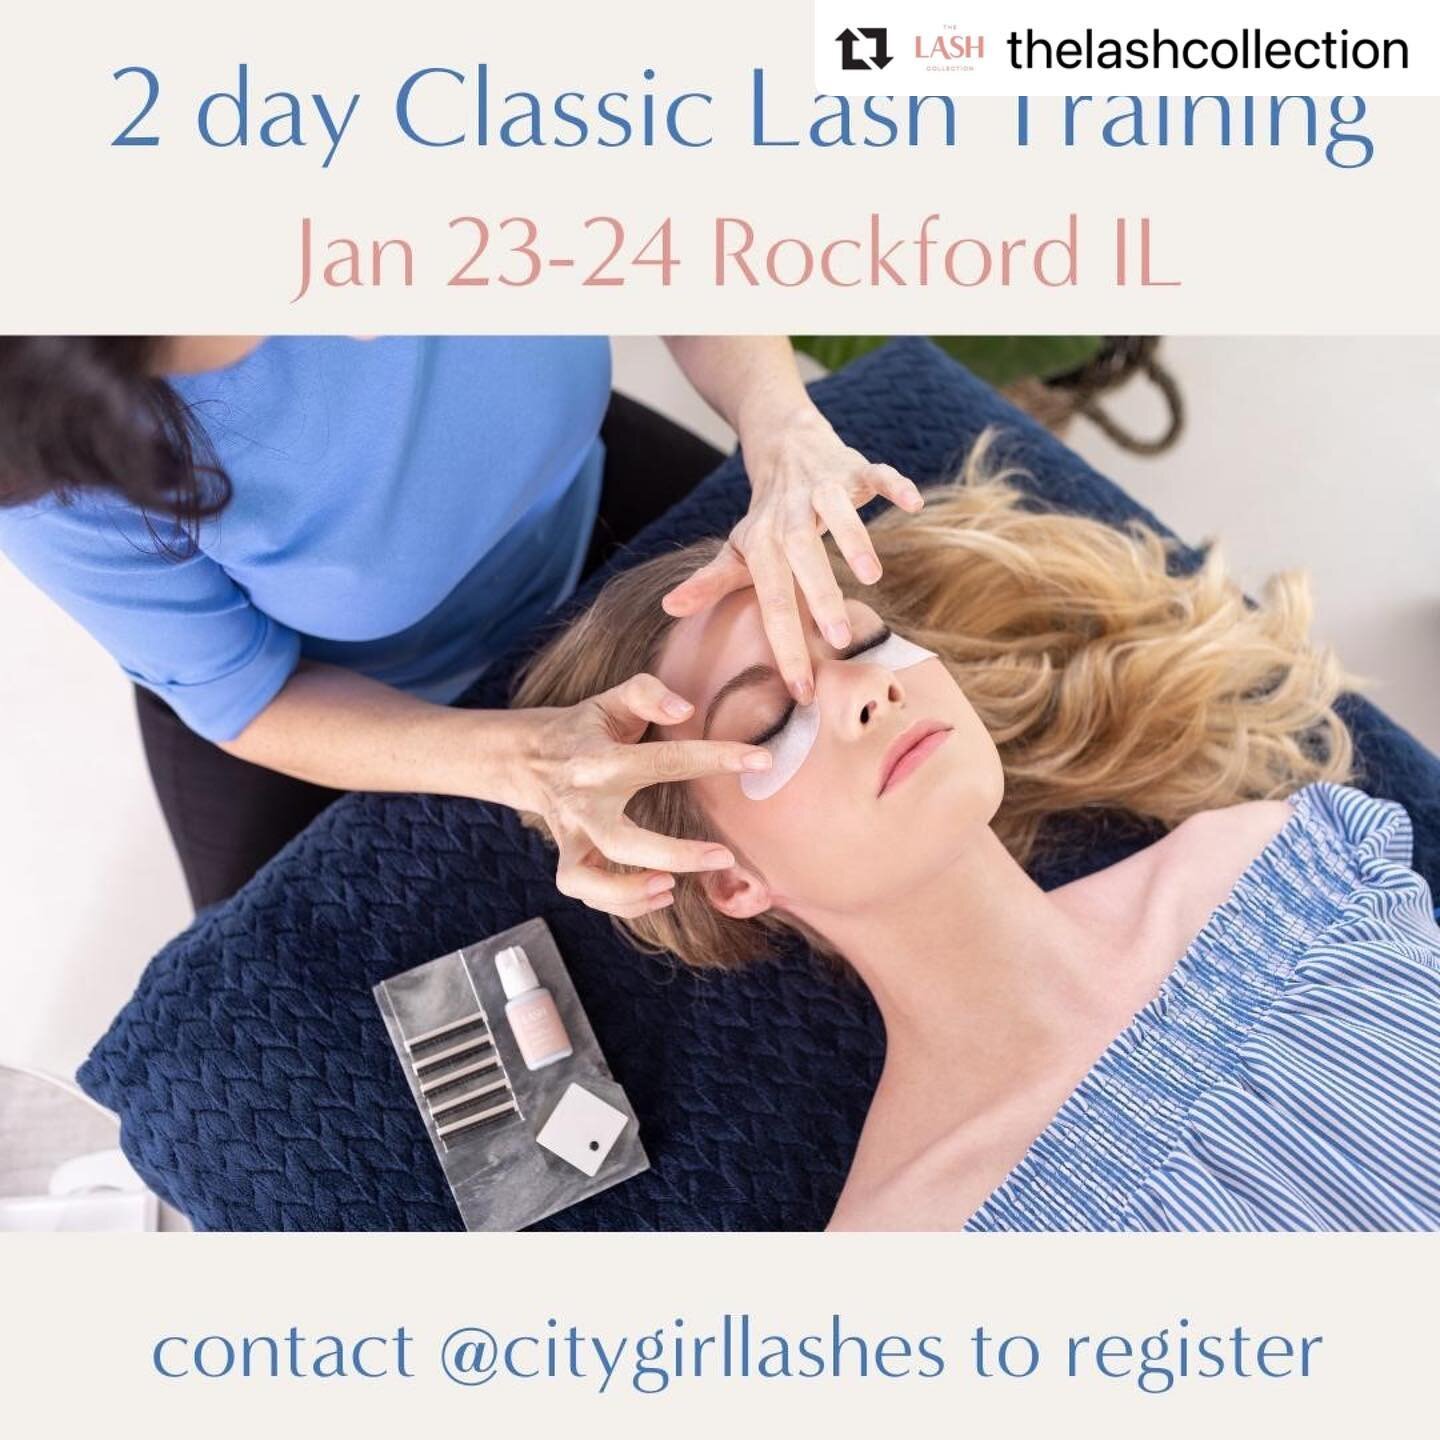 #Repost @thelashcollection with @make_repost
・・・
Are you ready to learn how to transform your clients like never before? Eyelash extensions will give your clients a look they love and keep them coming back for more. In our comprehensive 2 day course,